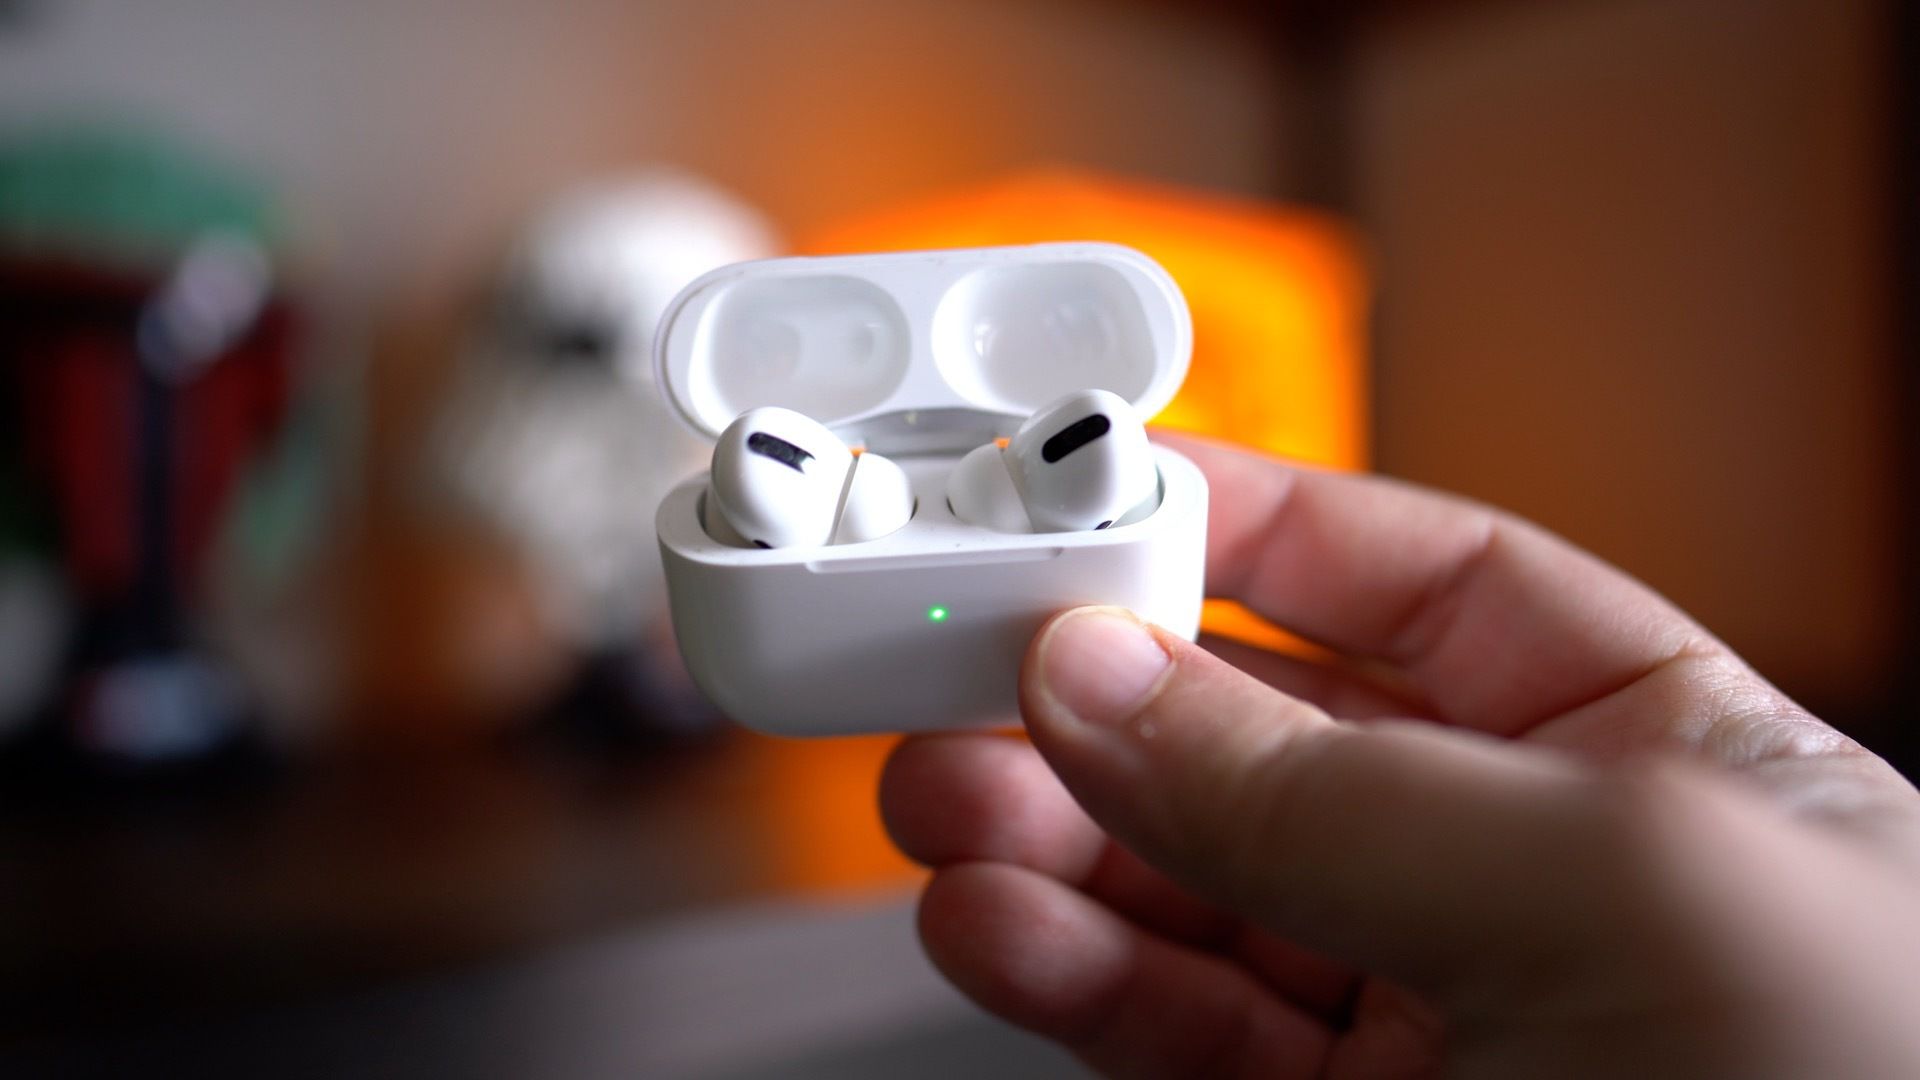 Kuo: AirPods Pro 2 to Launch Next Year, AirPods Shipments to Exceed 100 Million - MacRumors